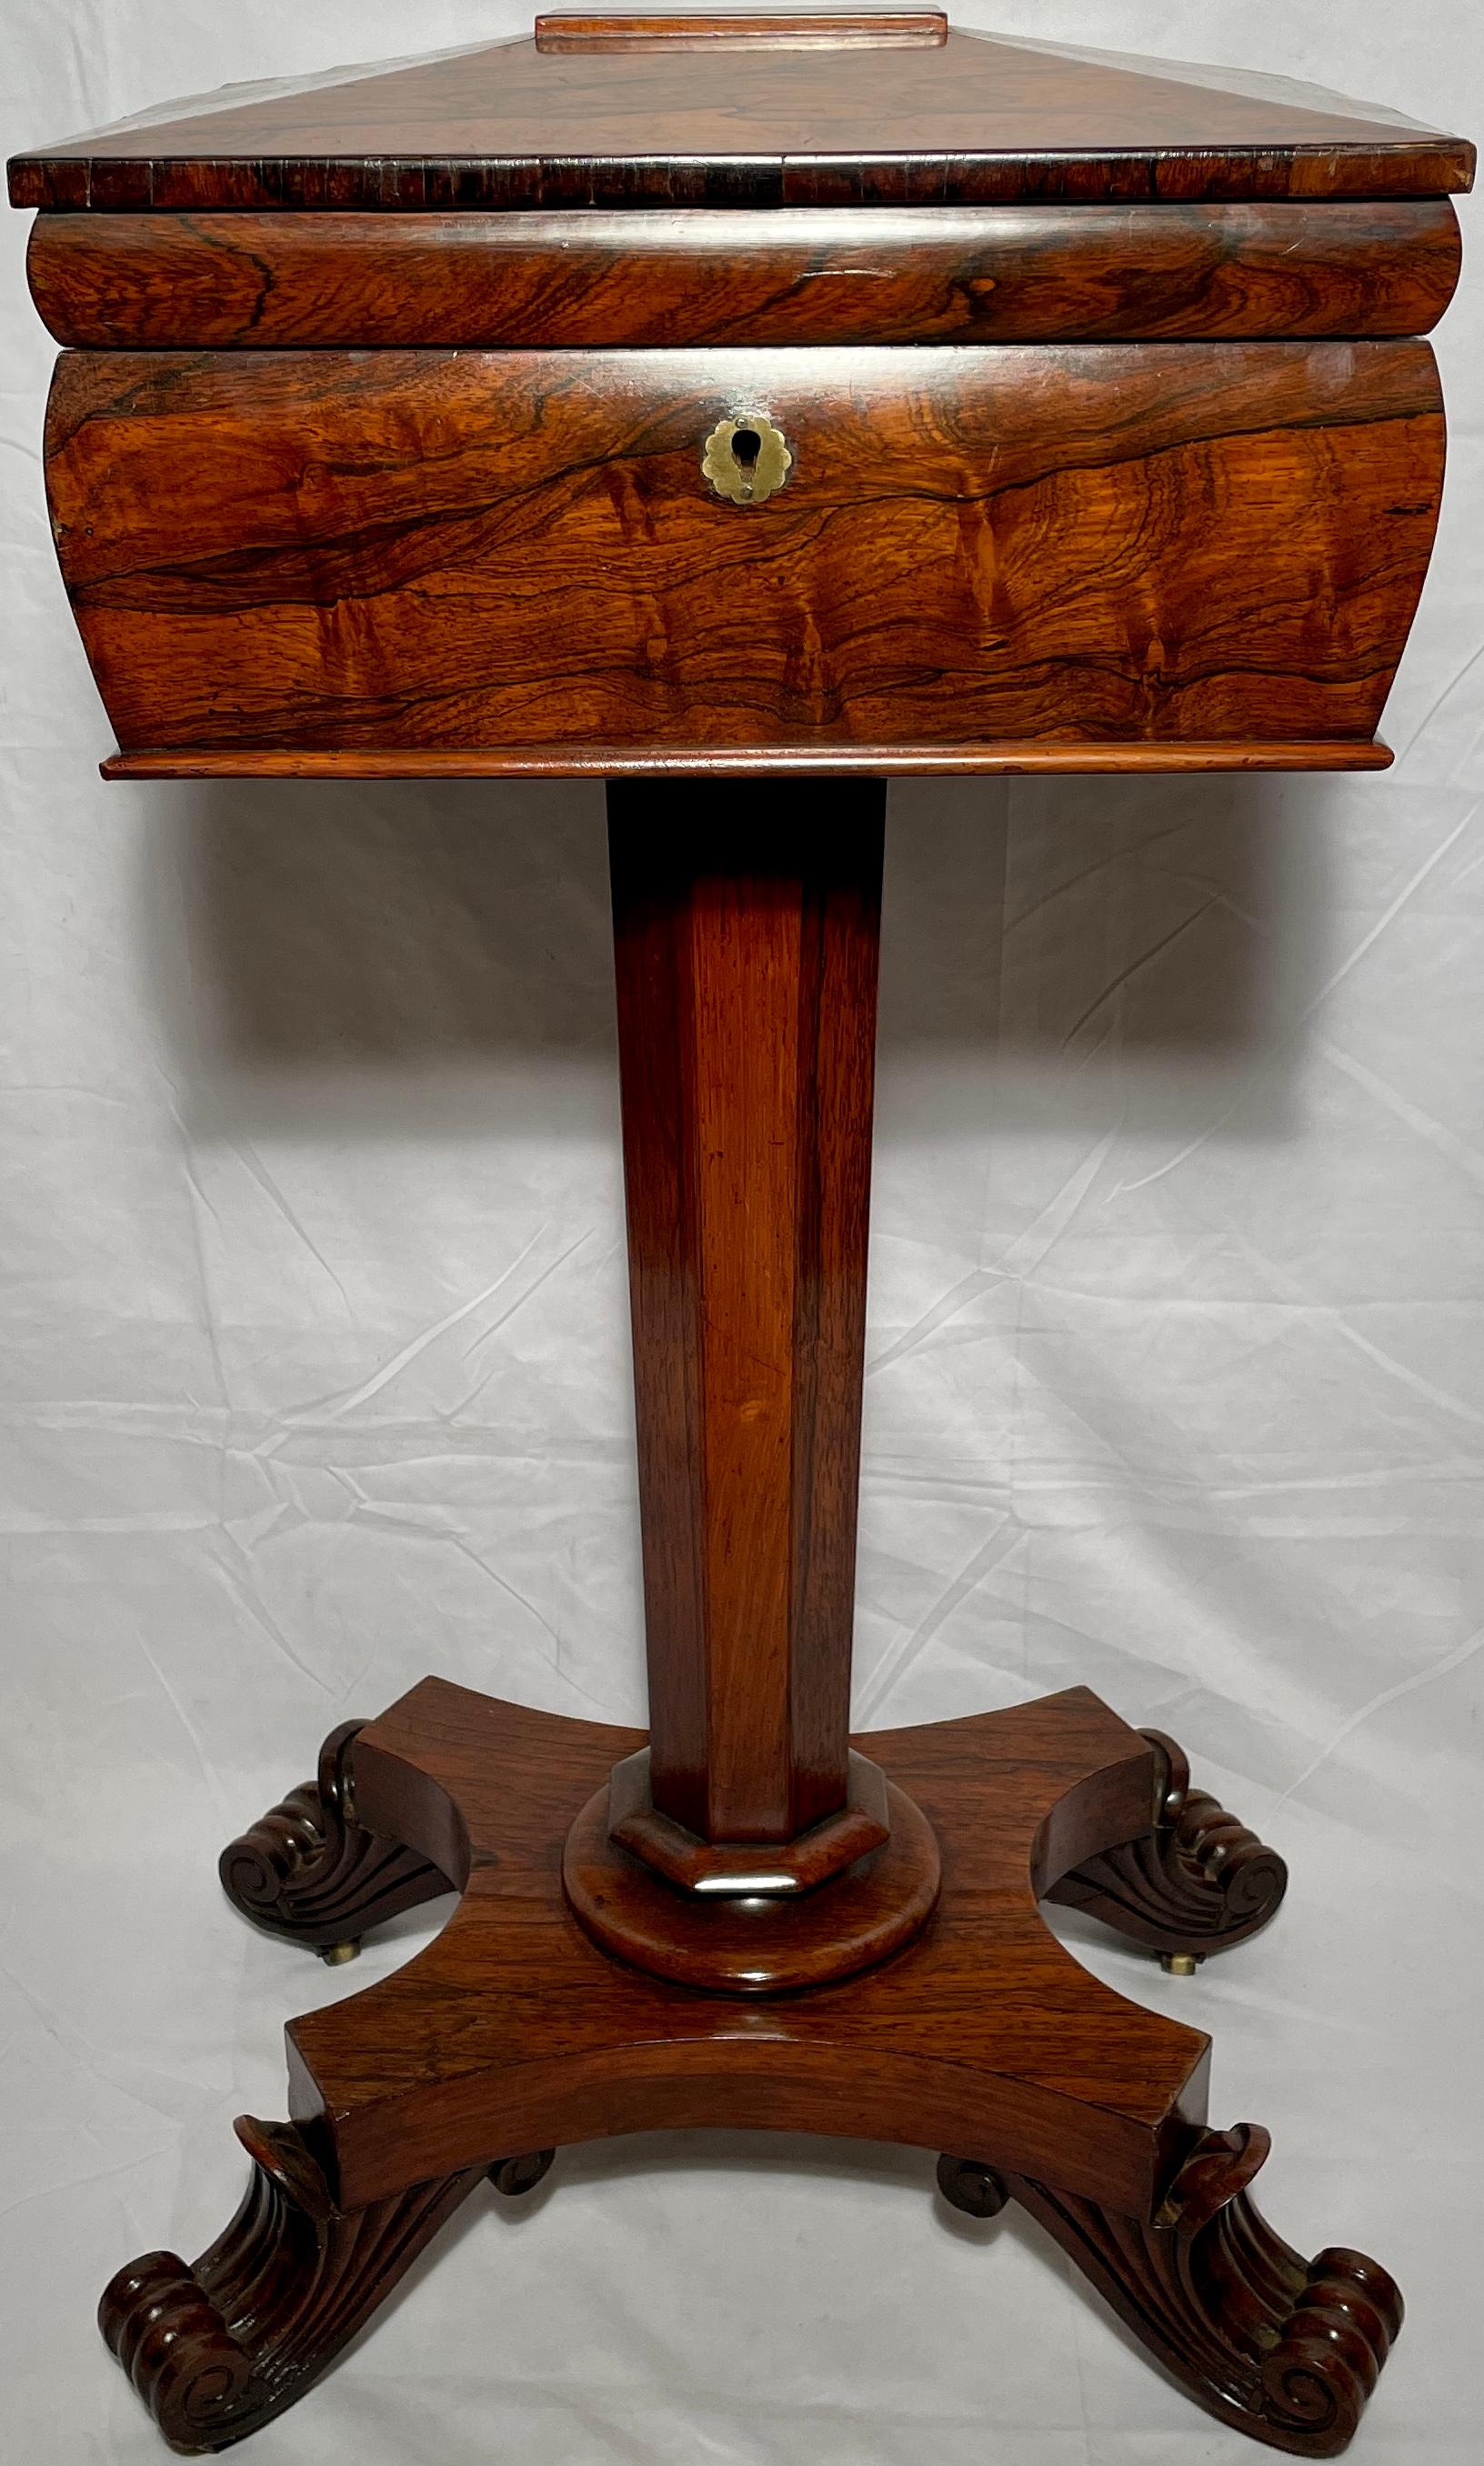 Antique English Victorian Rosewood Teapoy Table with Complete Interior, Circa 1845-1865.